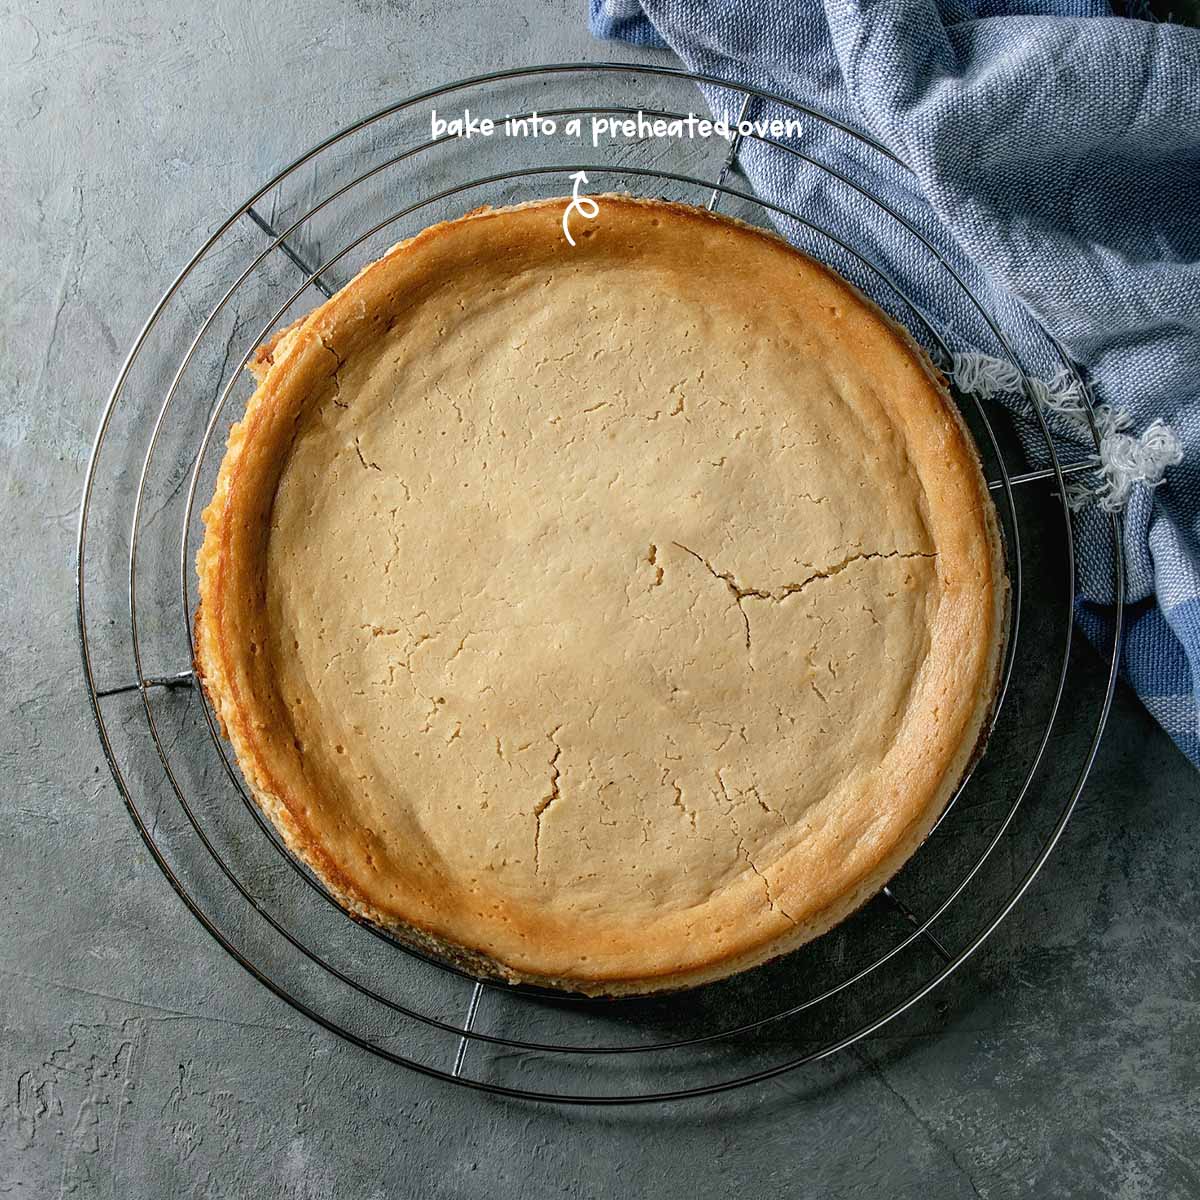 Bake cheesecake in the preheated oven for 1 hour and 5 minutes; then turn the oven off, partially open the door, and allow the cheesecake to rest for 15 minutes or more.